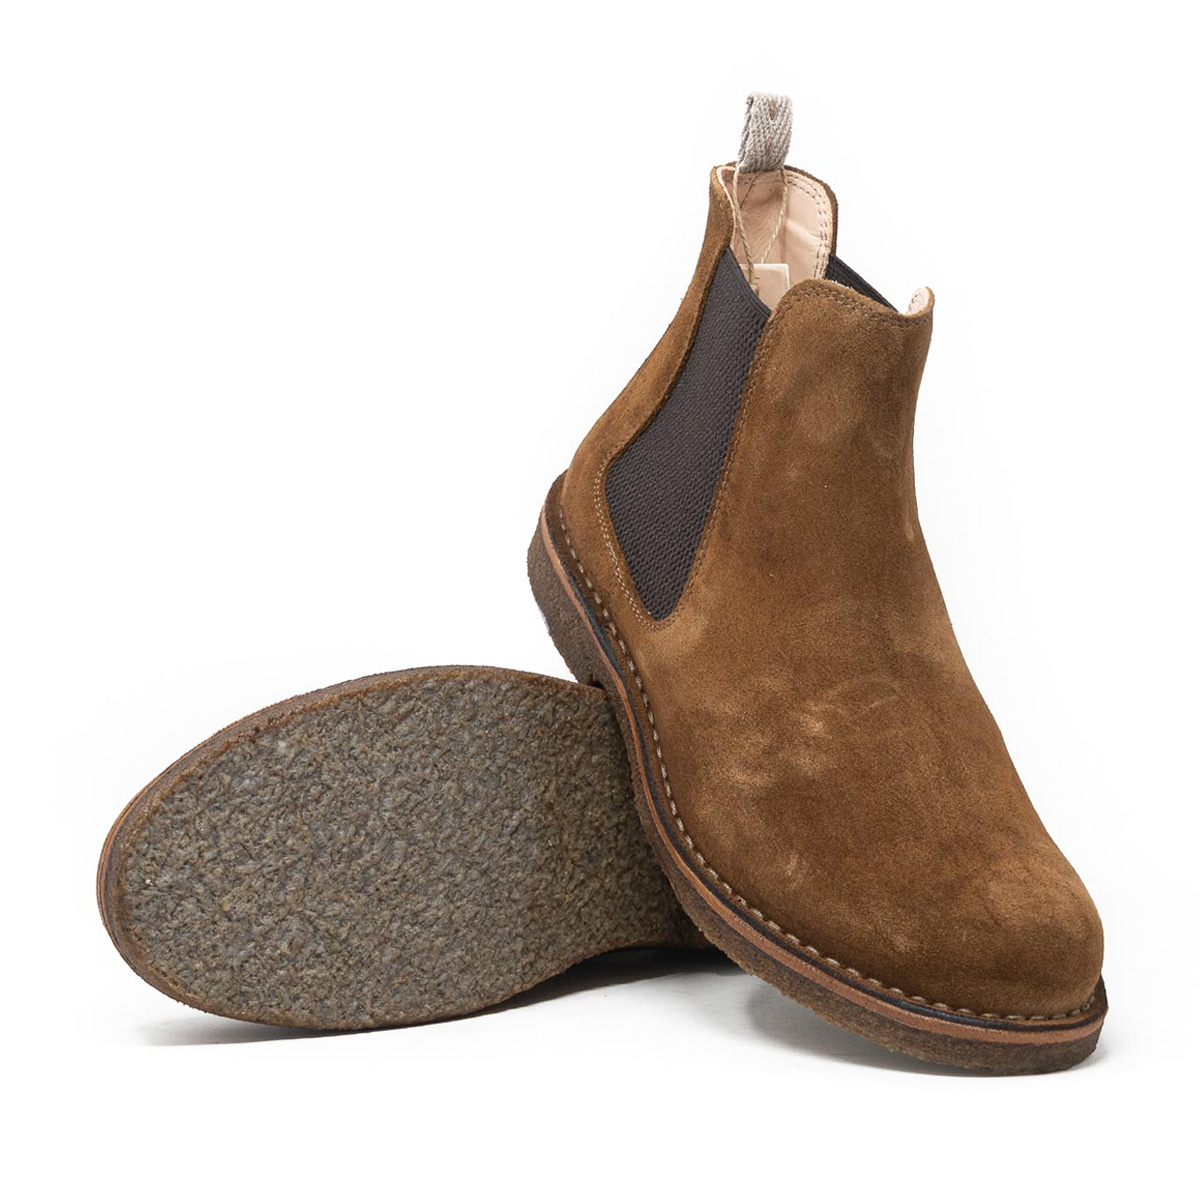 Astorflex Bitflex Chelsea Boot Dark Khaki, a timeless classic and a must-have for modern shoe enthusiasts